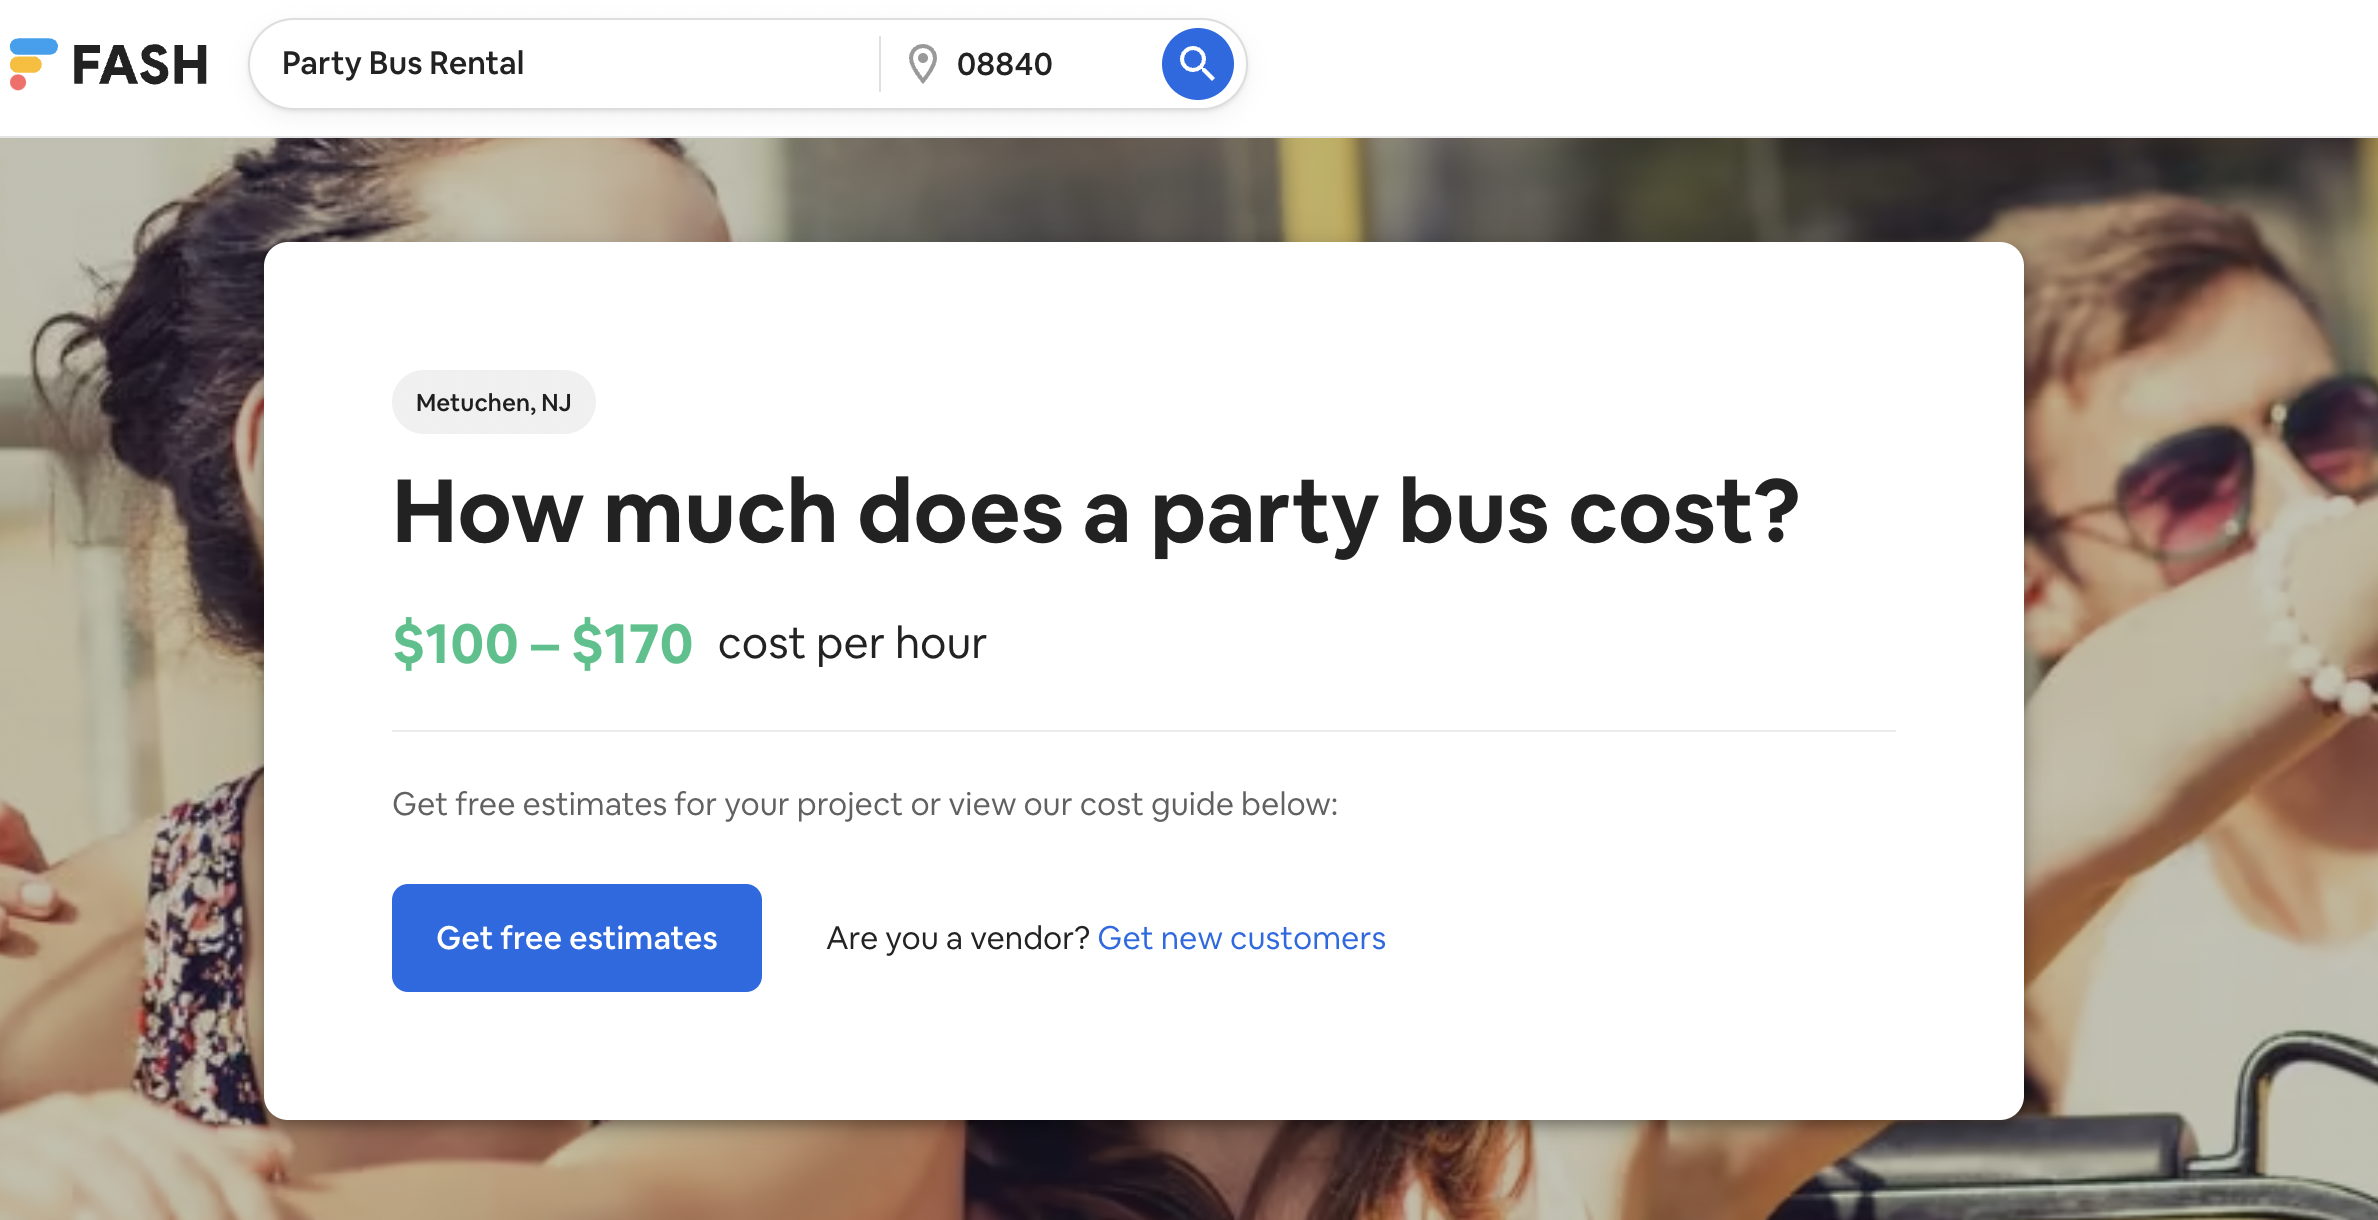 how-much-does-a-party-bus-cost-fash